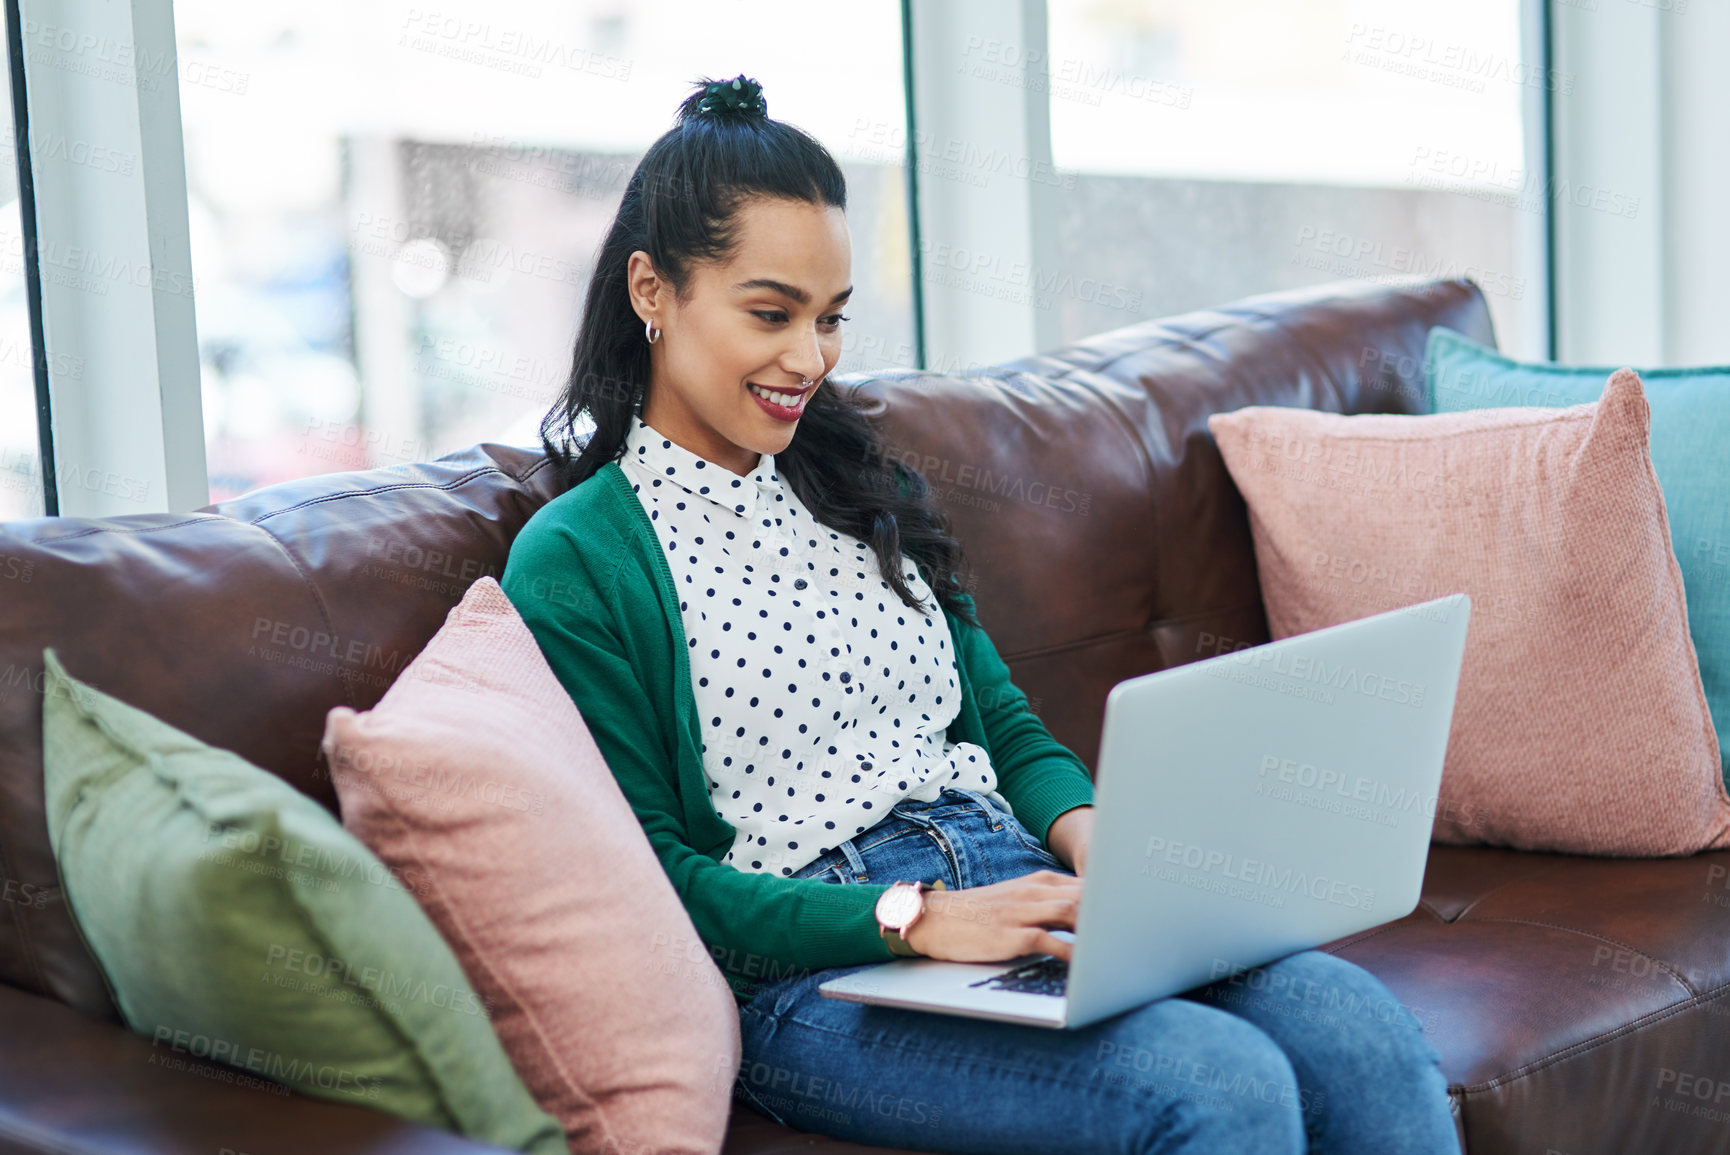 Buy stock photo Shot of a young woman using a laptop while relaxing on a sofa